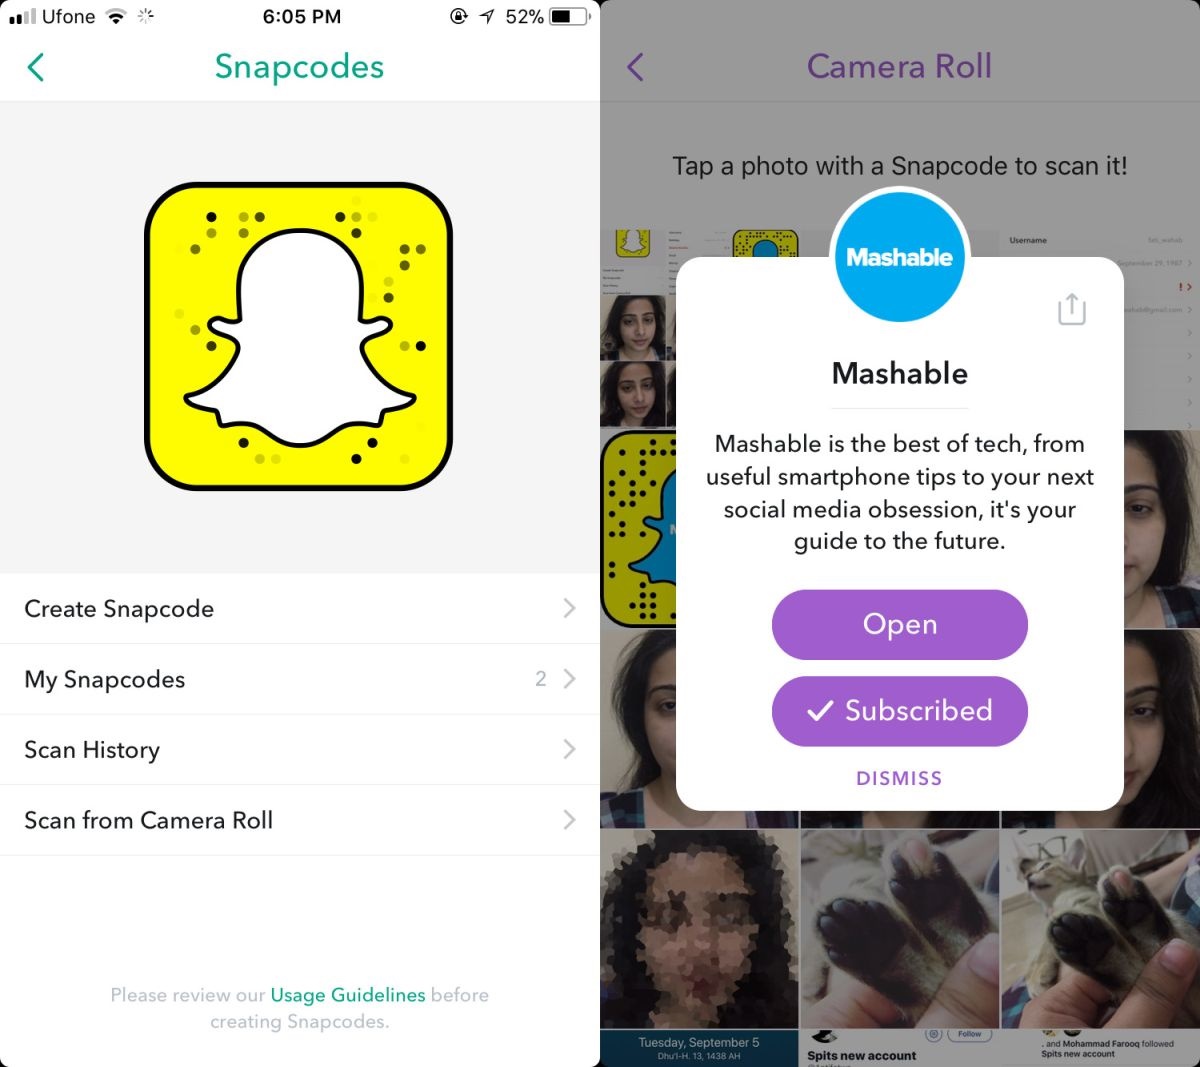 How To Add Friends To Snapchat By Scanning Their Snapcodes